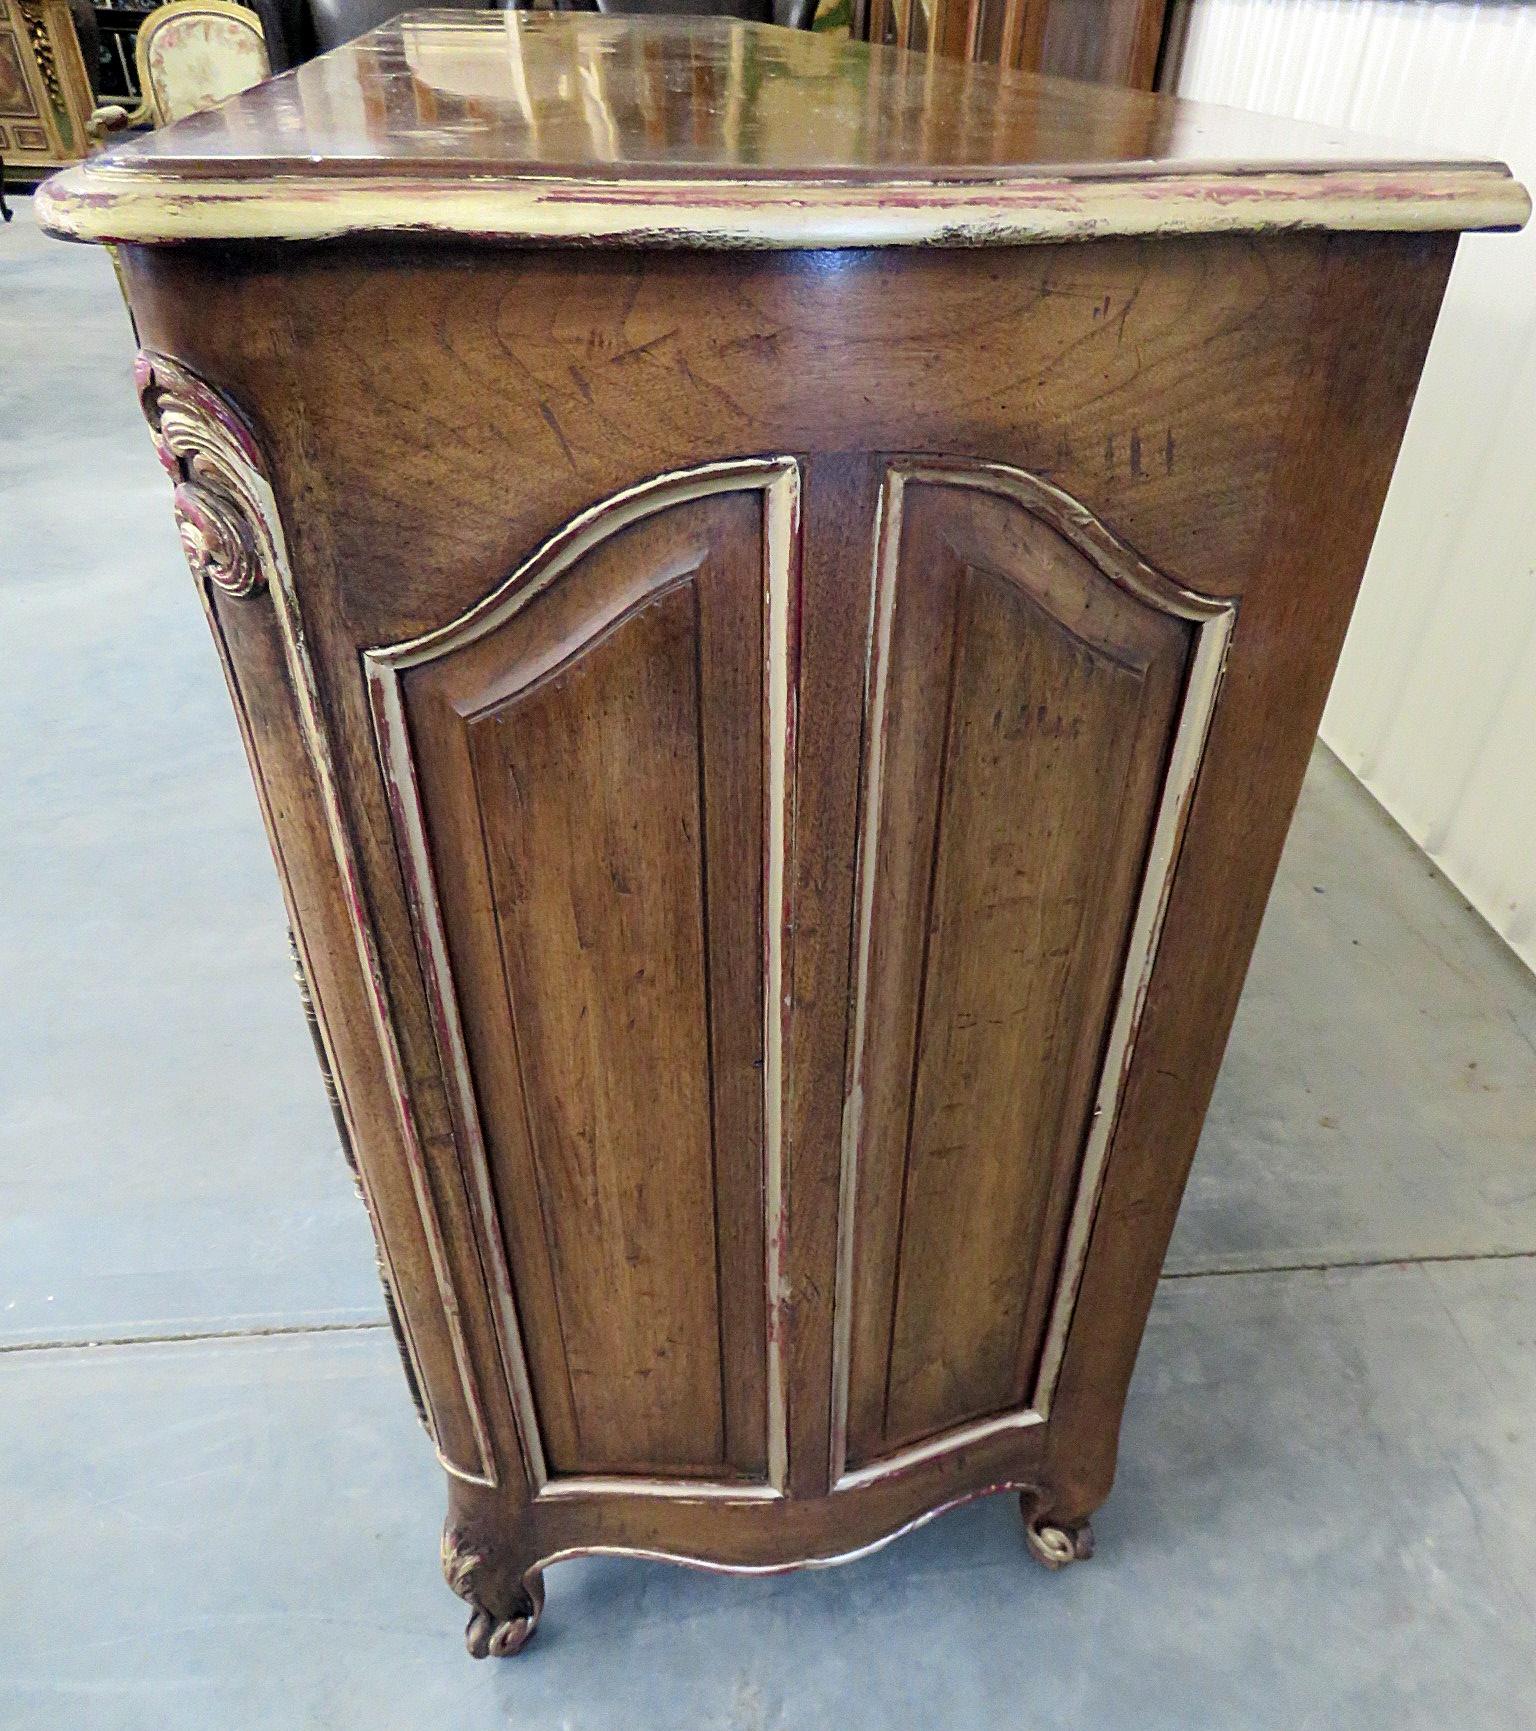 20th Century Auffray Attributed Antique Style Louis XV Country French Sideboard Buffet Server